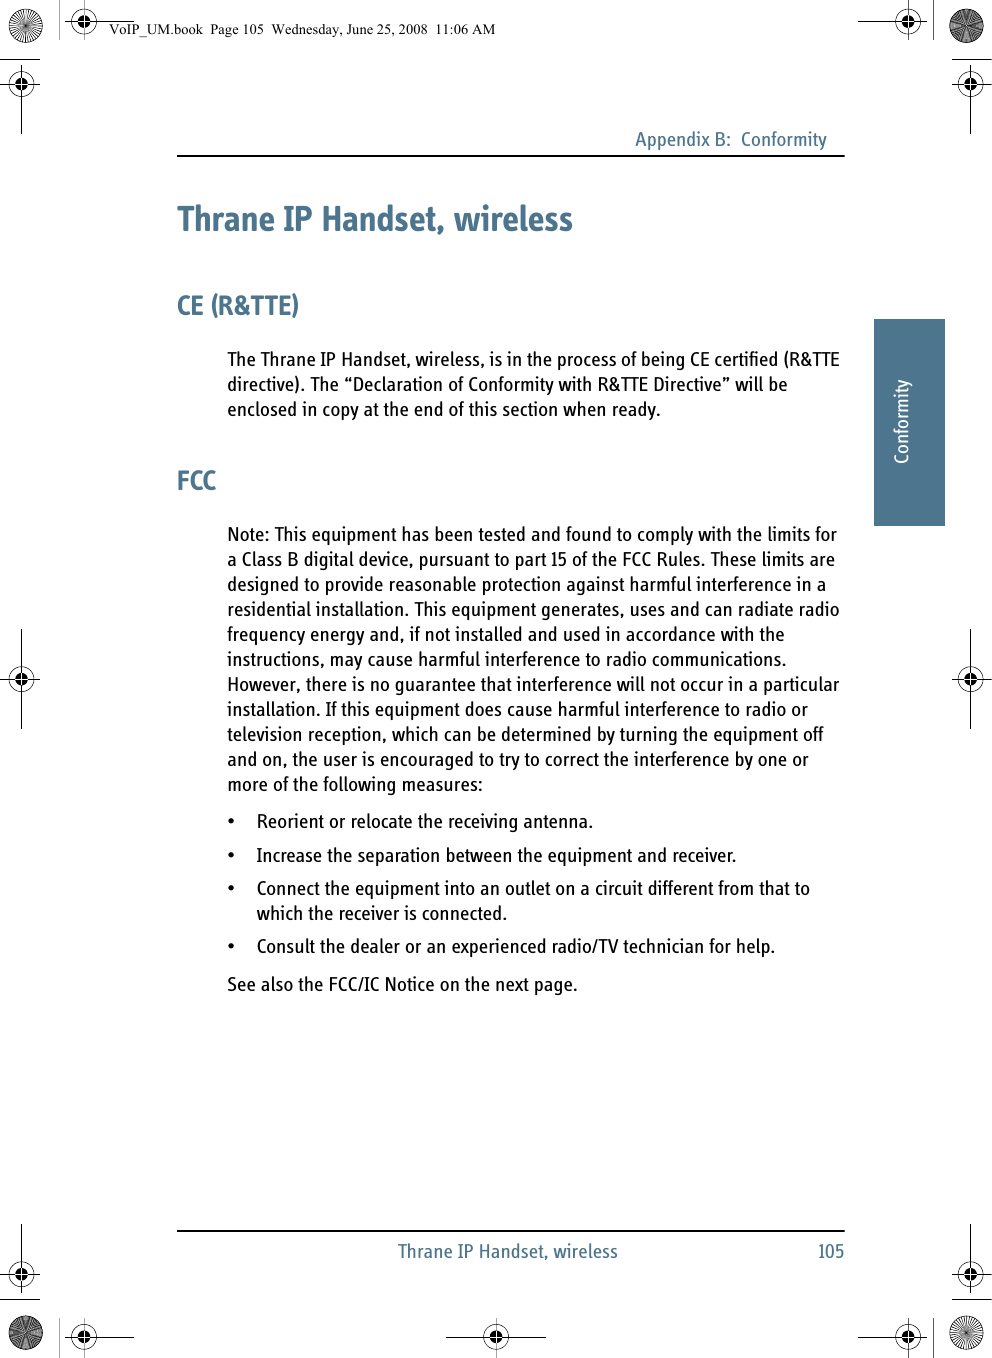 Appendix B:  ConformityThrane IP Handset, wireless 105BBBBBConformityThrane IP Handset, wirelessCE (R&amp;TTE)The Thrane IP Handset, wireless, is in the process of being CE certified (R&amp;TTE directive). The “Declaration of Conformity with R&amp;TTE Directive” will be enclosed in copy at the end of this section when ready.FCCNote: This equipment has been tested and found to comply with the limits for a Class B digital device, pursuant to part 15 of the FCC Rules. These limits are designed to provide reasonable protection against harmful interference in a residential installation. This equipment generates, uses and can radiate radio frequency energy and, if not installed and used in accordance with the instructions, may cause harmful interference to radio communications. However, there is no guarantee that interference will not occur in a particular installation. If this equipment does cause harmful interference to radio or television reception, which can be determined by turning the equipment off and on, the user is encouraged to try to correct the interference by one or more of the following measures:• Reorient or relocate the receiving antenna.• Increase the separation between the equipment and receiver.• Connect the equipment into an outlet on a circuit different from that to which the receiver is connected.• Consult the dealer or an experienced radio/TV technician for help.See also the FCC/IC Notice on the next page.VoIP_UM.book  Page 105  Wednesday, June 25, 2008  11:06 AM